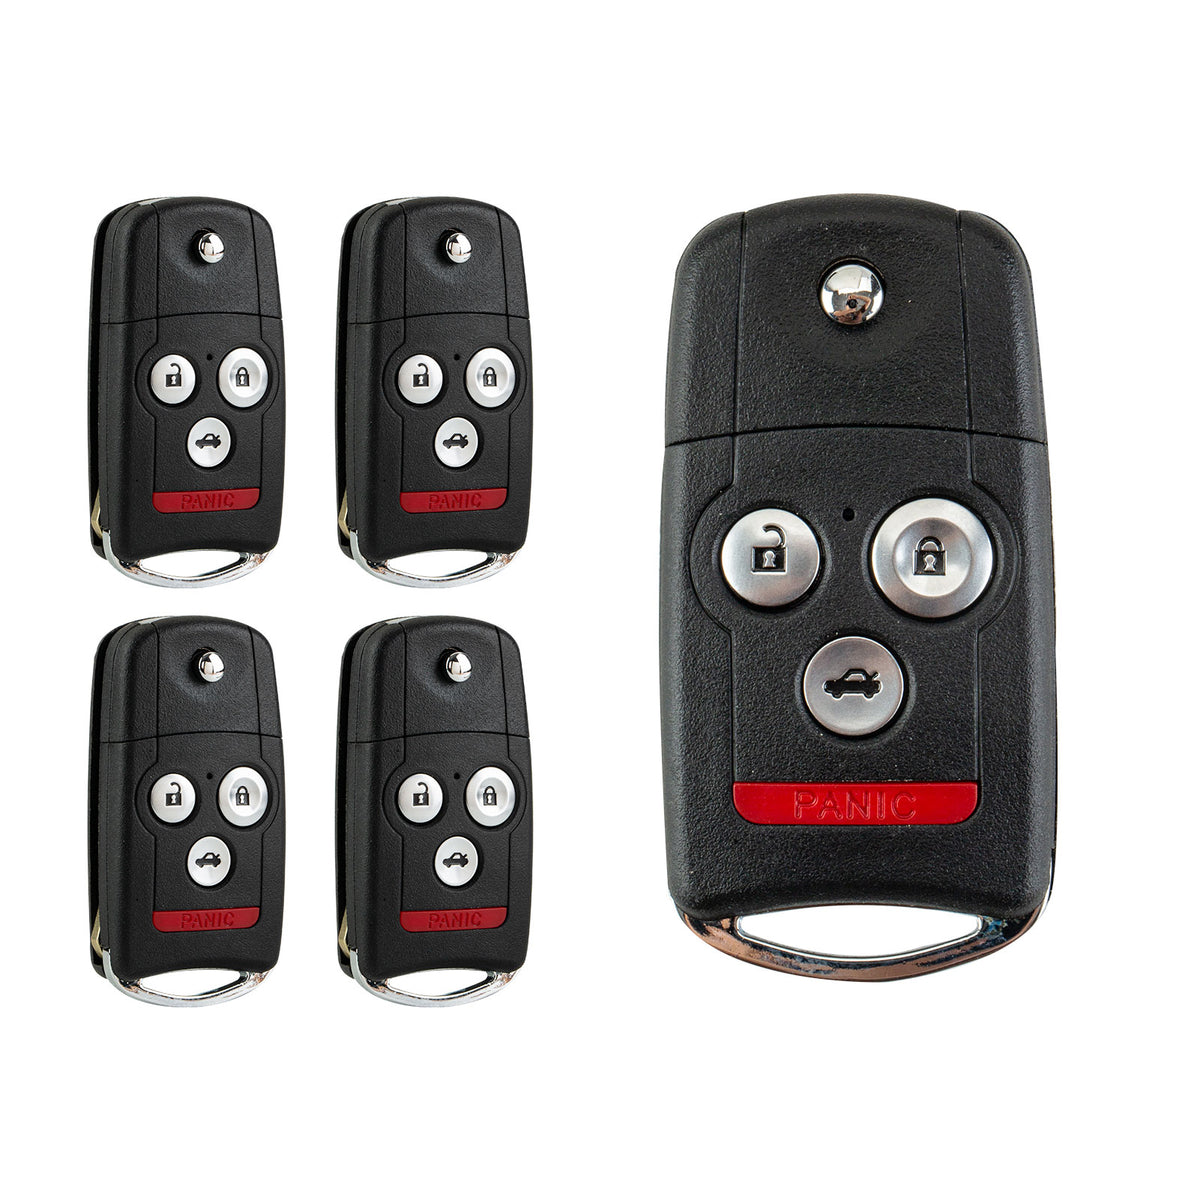 Lots of 5 Remote Car Key Fob Replacement for OUCG8D-439H-A fits 2007 2008 Acura TL 46 Chip